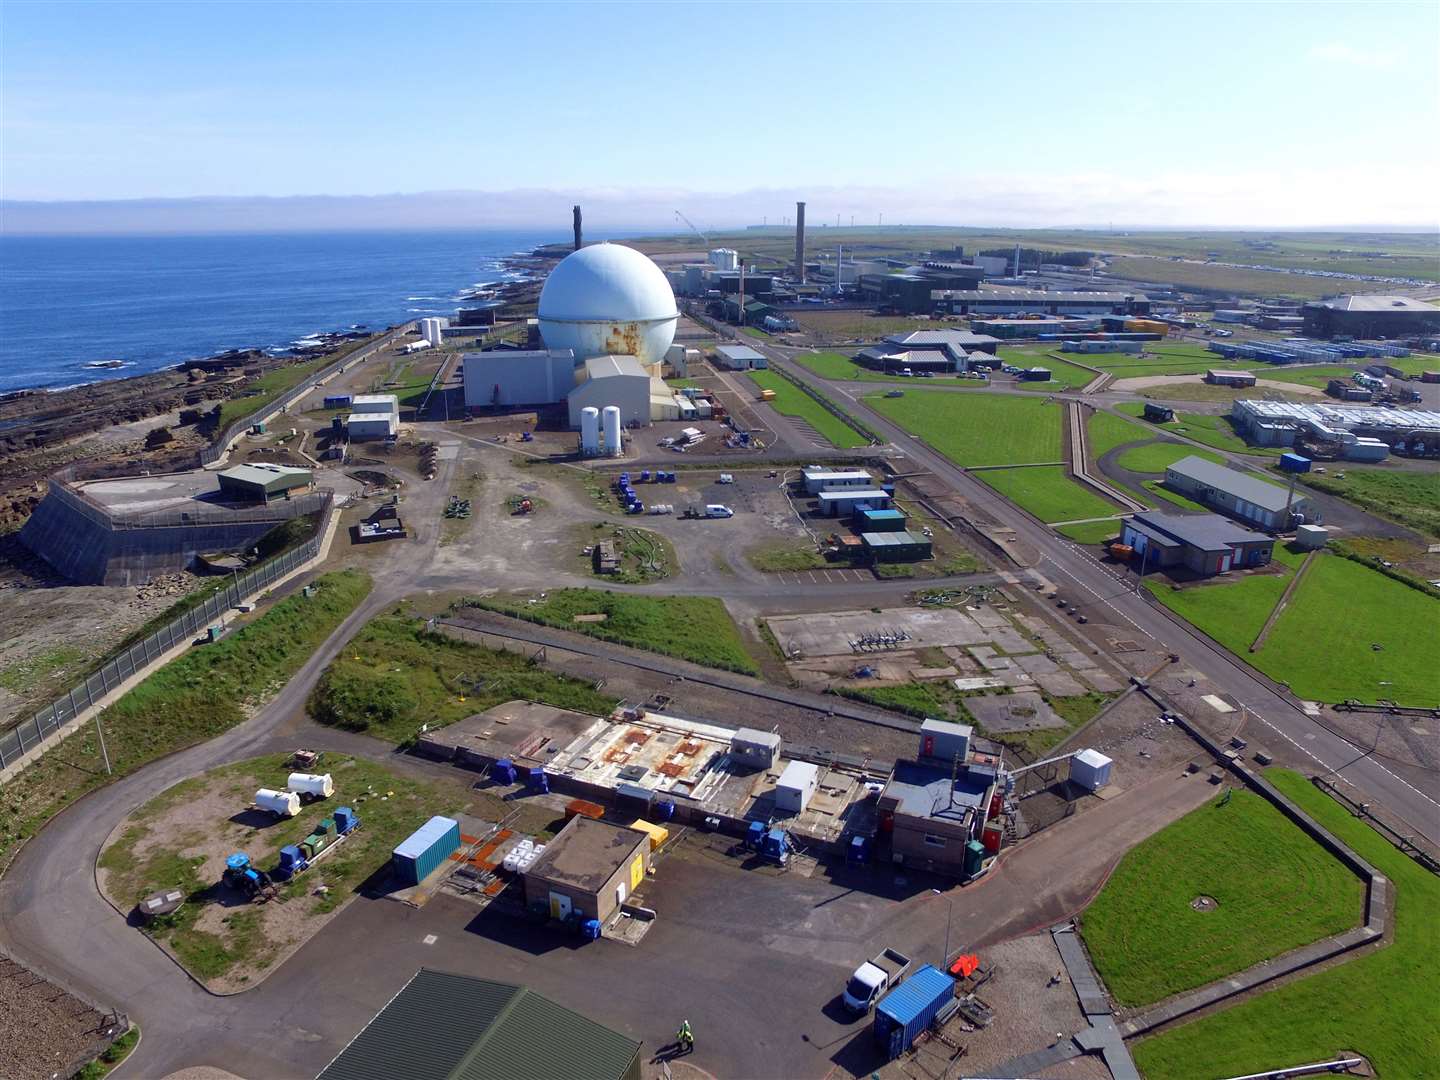 Dounreay provides funding for a range of projects in the surrounding area.